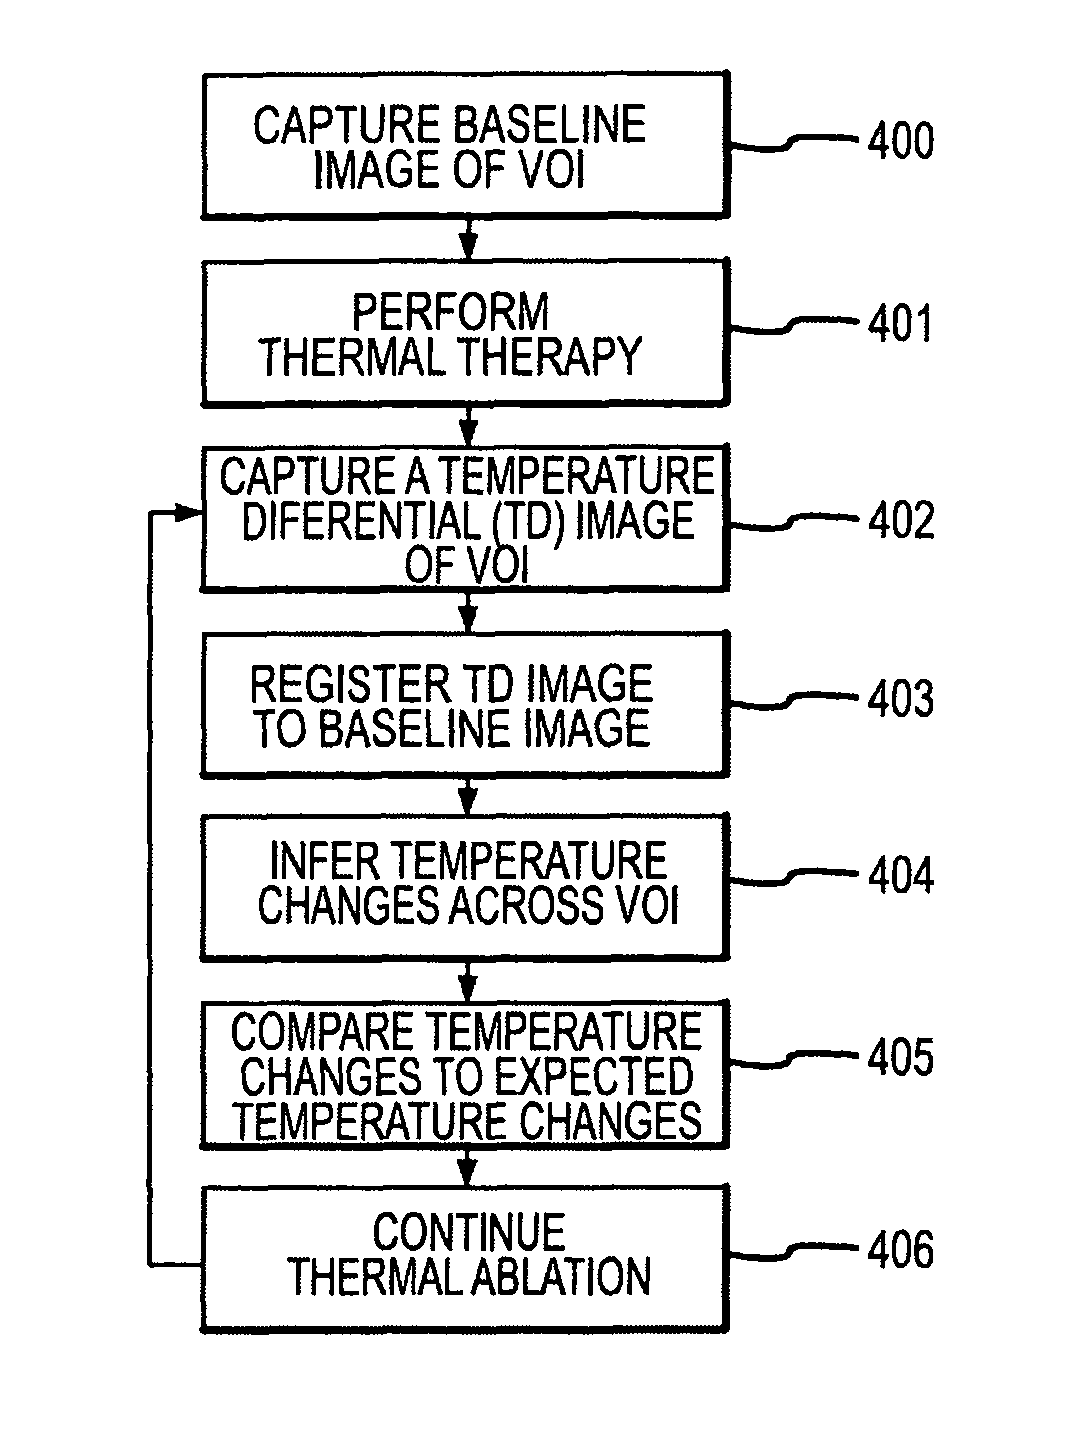 Methods for planning and performing thermal ablation